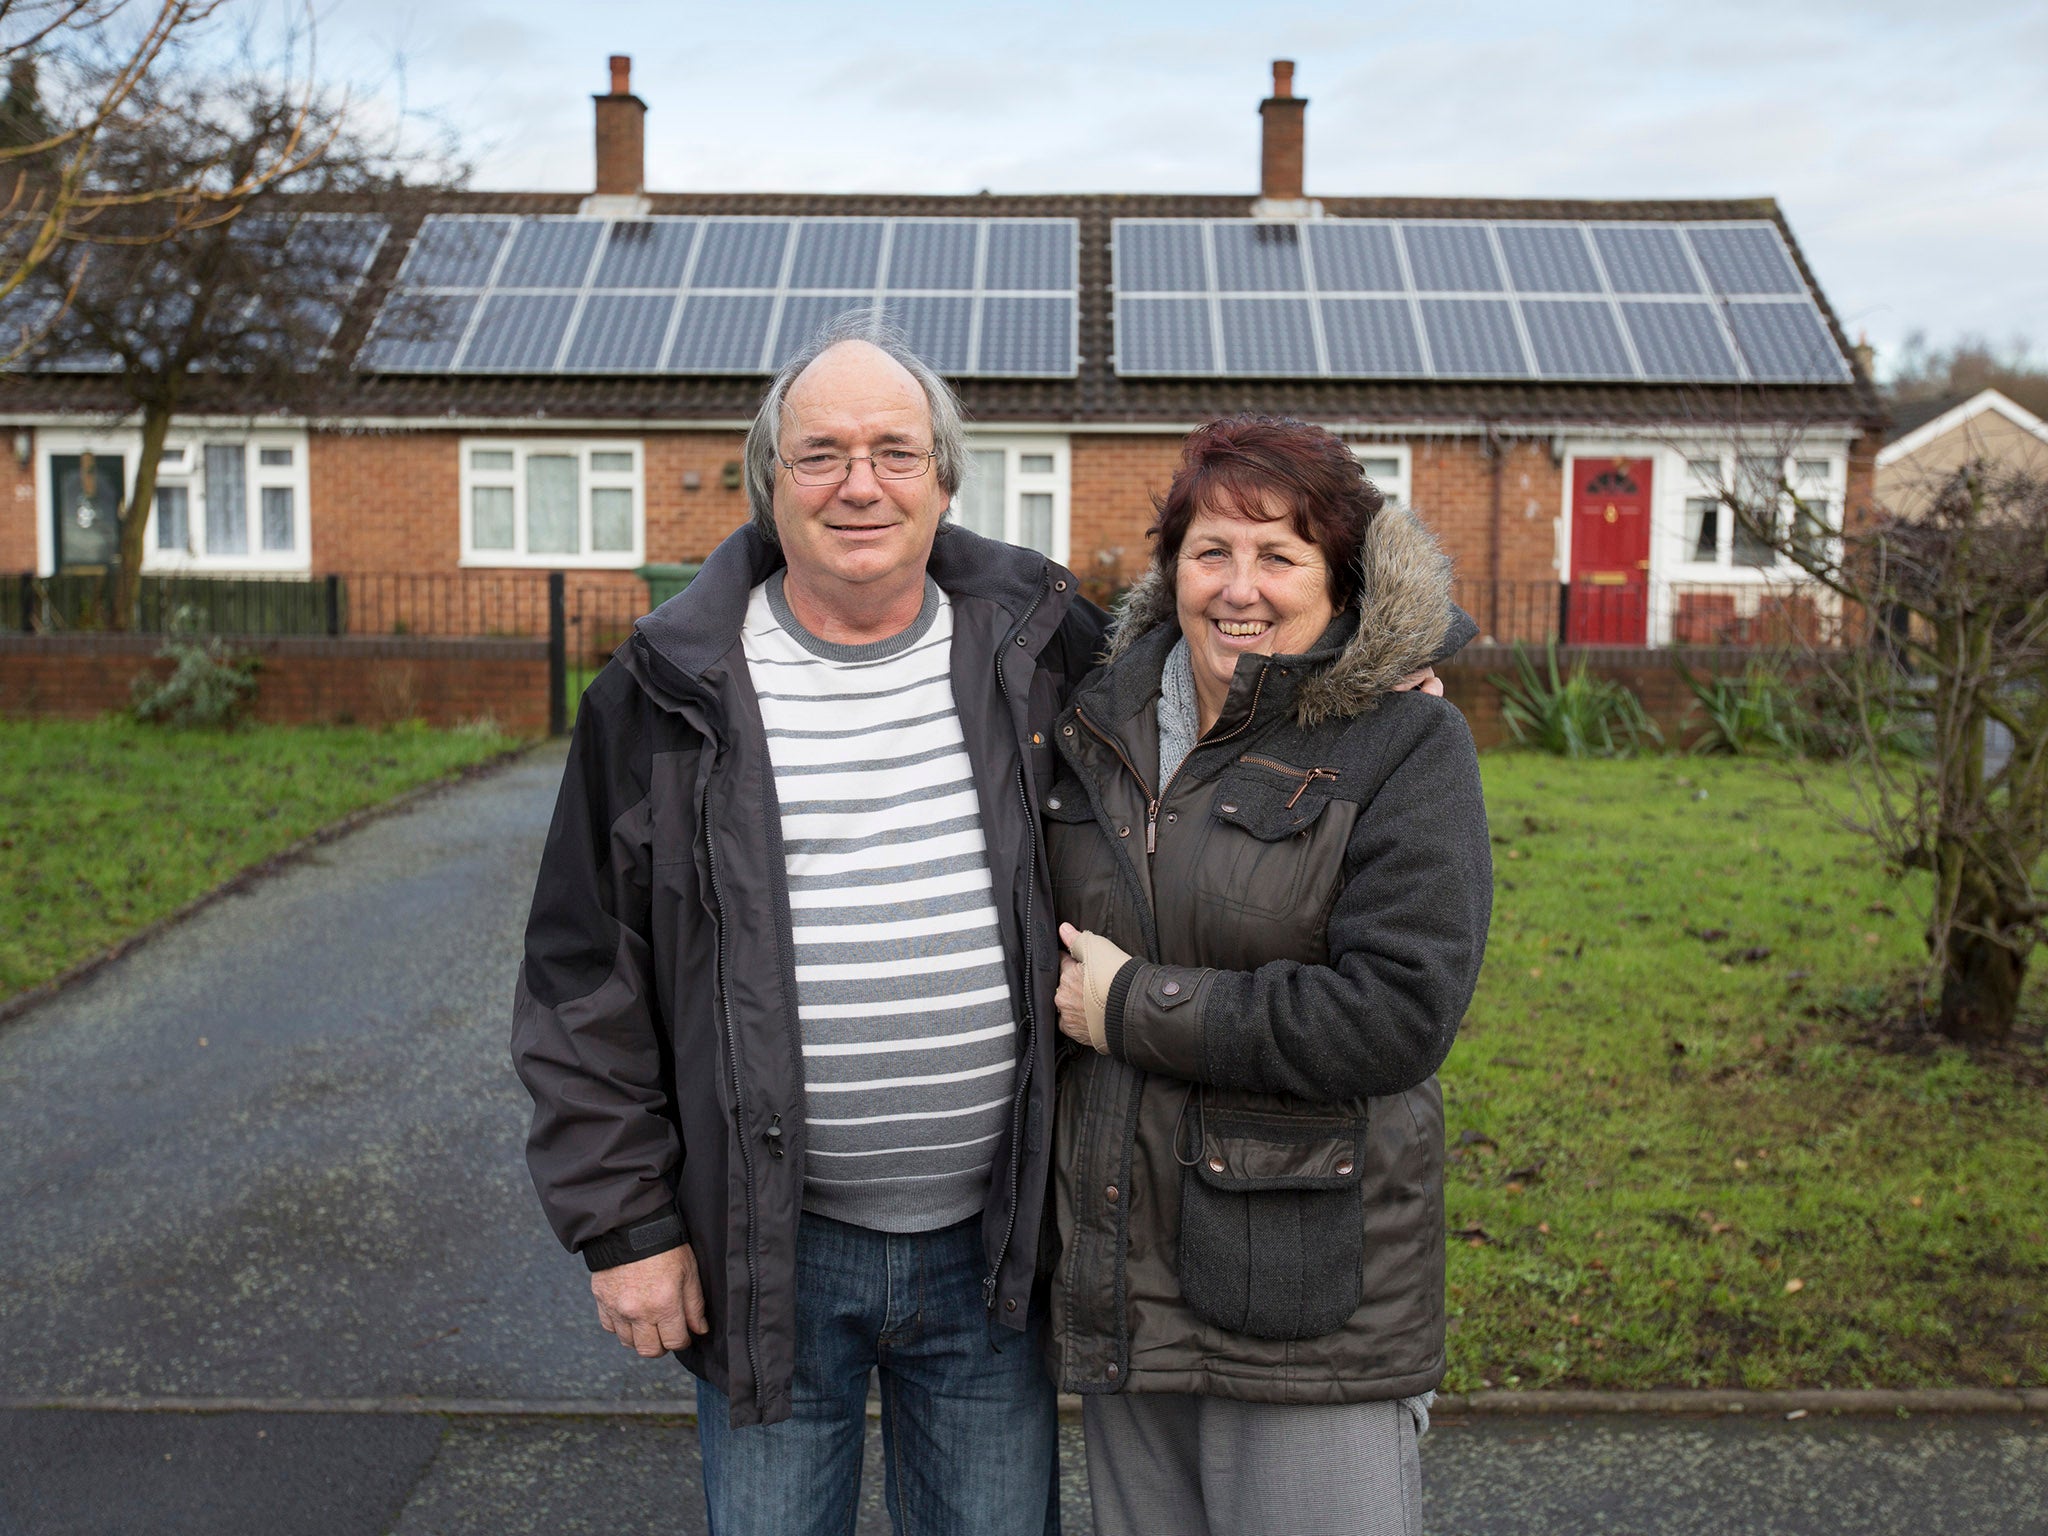 Pat and Richard Astbury at their home in Norton Canes, Staffordshire. They have benefitted from the Community Energy Project aimed at helping council tenants with their energy bills. They have had solar panels installed.